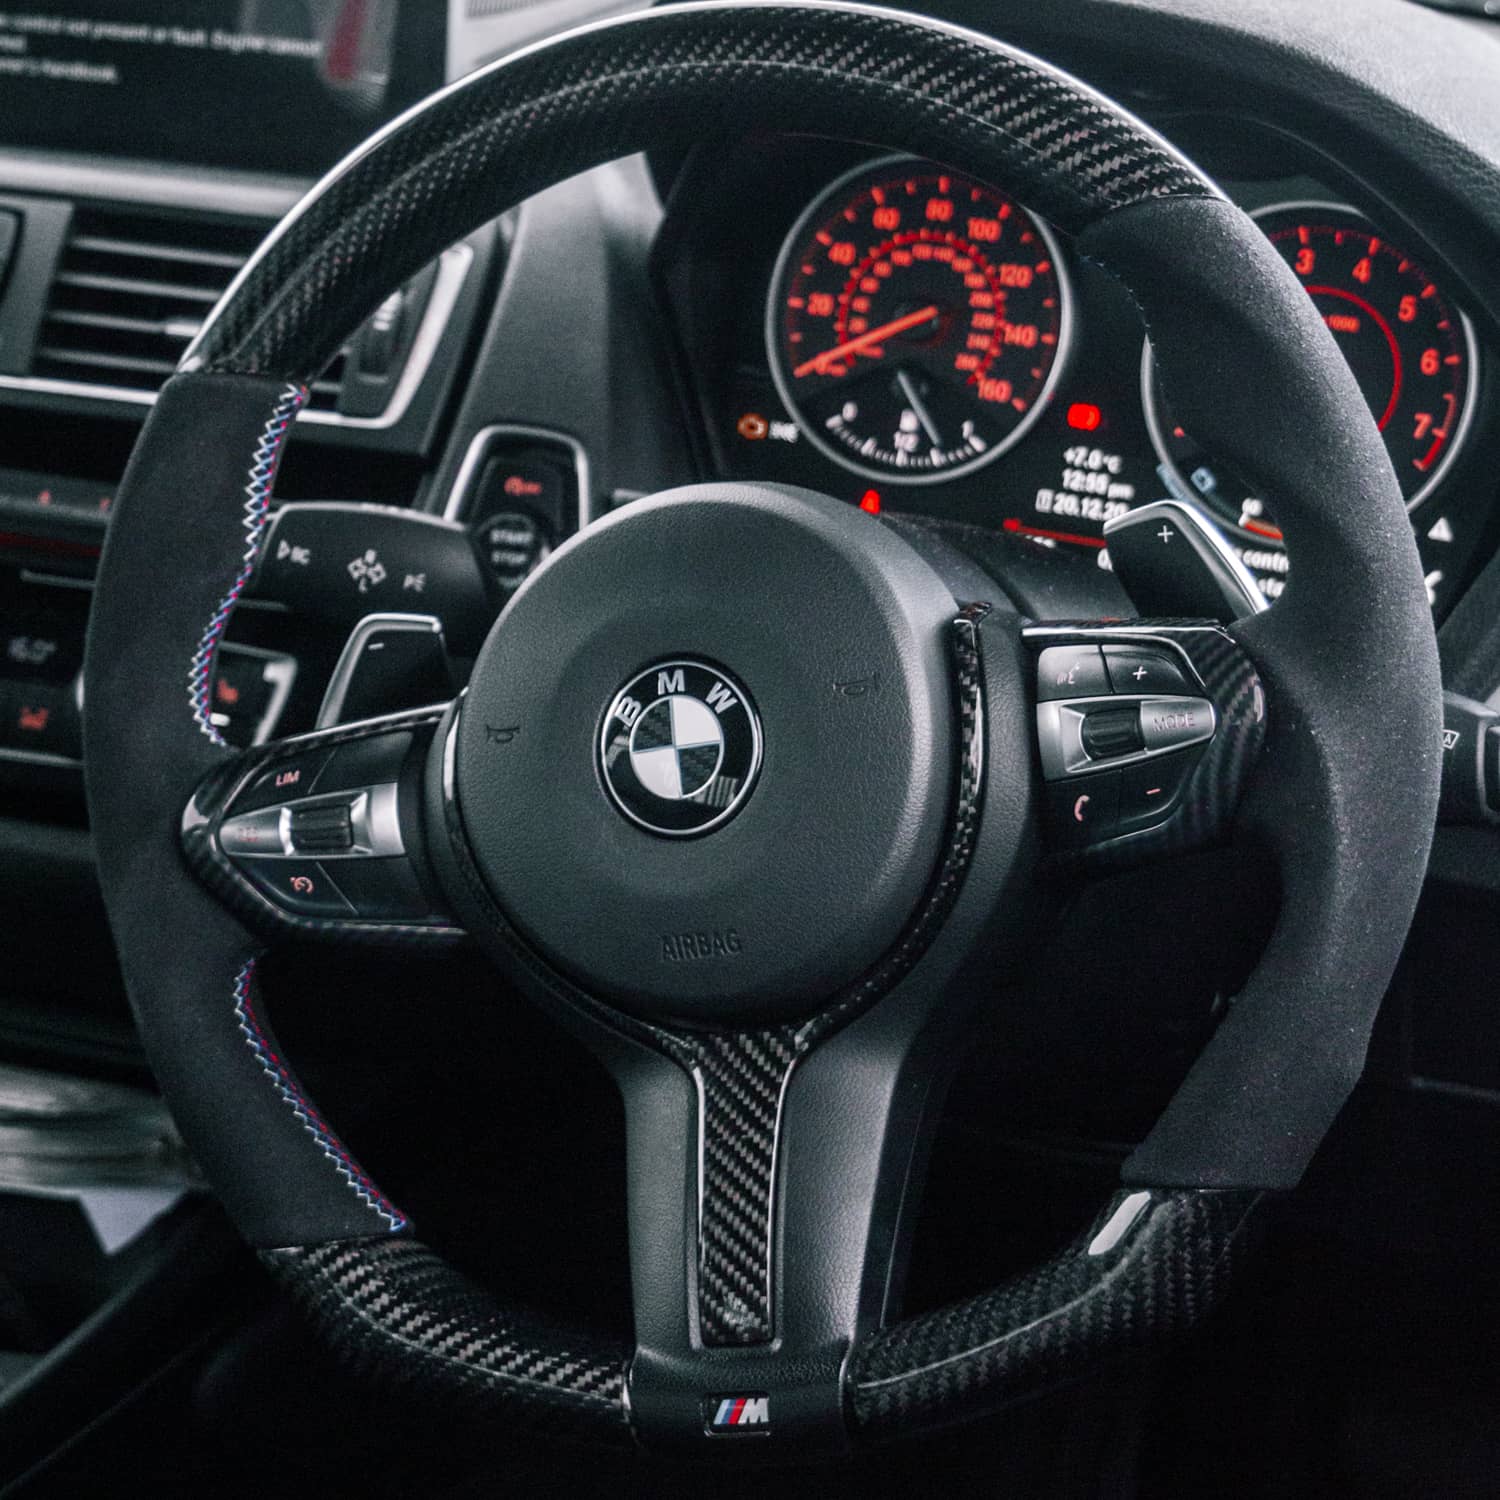 SHFT BMW F Series Steering Wheel Button Trim In Gloss Carbon Fibre Look-R44 Performance